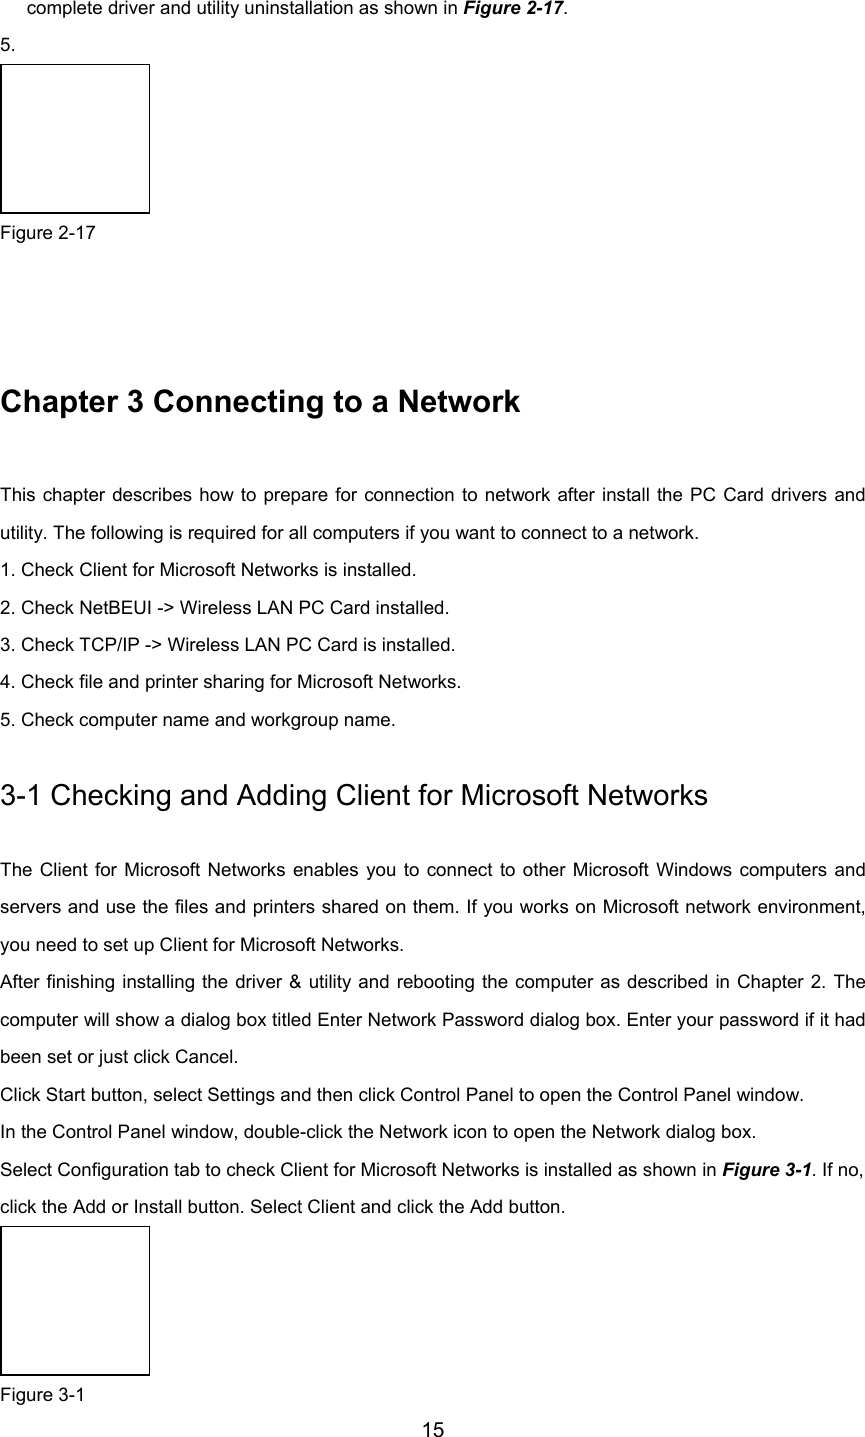        15complete driver and utility uninstallation as shown in Figure 2-17.5.   Figure 2-17   Chapter 3 Connecting to a Network This chapter describes how to prepare for connection to network after install the PC Card drivers andutility. The following is required for all computers if you want to connect to a network. 1. Check Client for Microsoft Networks is installed. 2. Check NetBEUI -&gt; Wireless LAN PC Card installed. 3. Check TCP/IP -&gt; Wireless LAN PC Card is installed. 4. Check file and printer sharing for Microsoft Networks. 5. Check computer name and workgroup name. 3-1 Checking and Adding Client for Microsoft Networks The Client for Microsoft Networks enables you to connect to other Microsoft Windows computers andservers and use the files and printers shared on them. If you works on Microsoft network environment,you need to set up Client for Microsoft Networks. After finishing installing the driver &amp; utility and rebooting the computer as described in Chapter 2. Thecomputer will show a dialog box titled Enter Network Password dialog box. Enter your password if it hadbeen set or just click Cancel. Click Start button, select Settings and then click Control Panel to open the Control Panel window. In the Control Panel window, double-click the Network icon to open the Network dialog box. Select Configuration tab to check Client for Microsoft Networks is installed as shown in Figure 3-1. If no, click the Add or Install button. Select Client and click the Add button.  Figure 3-1